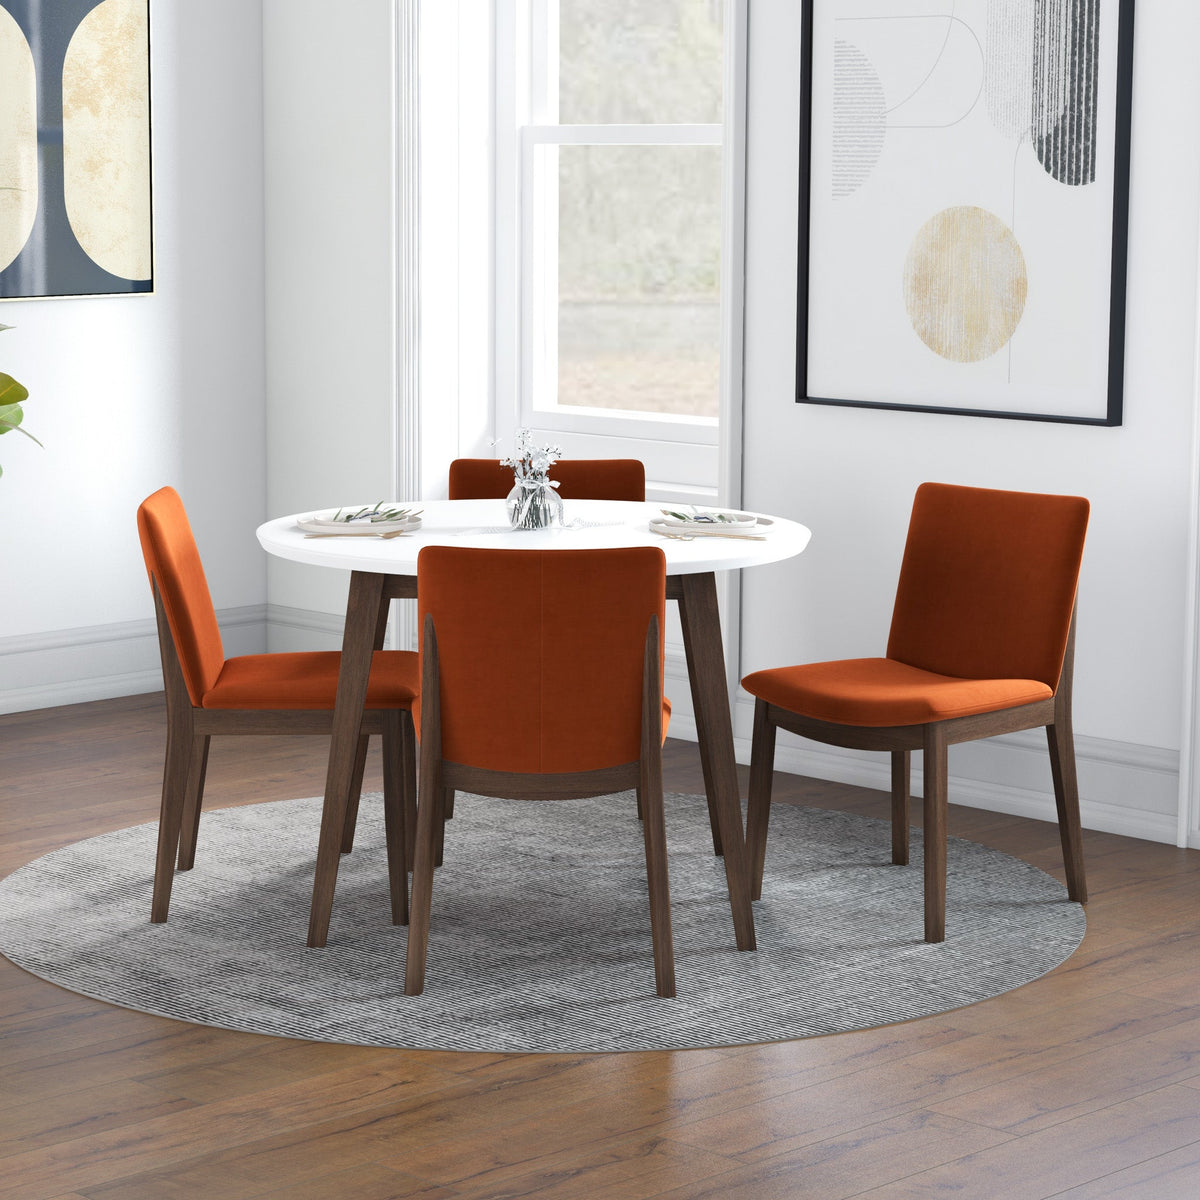 Dining Set Palmer White Top Table with 4 Virginia Burnt Orange Velvet Chairs | Mid in Mod | Houston TX | Best Furniture stores in Houston